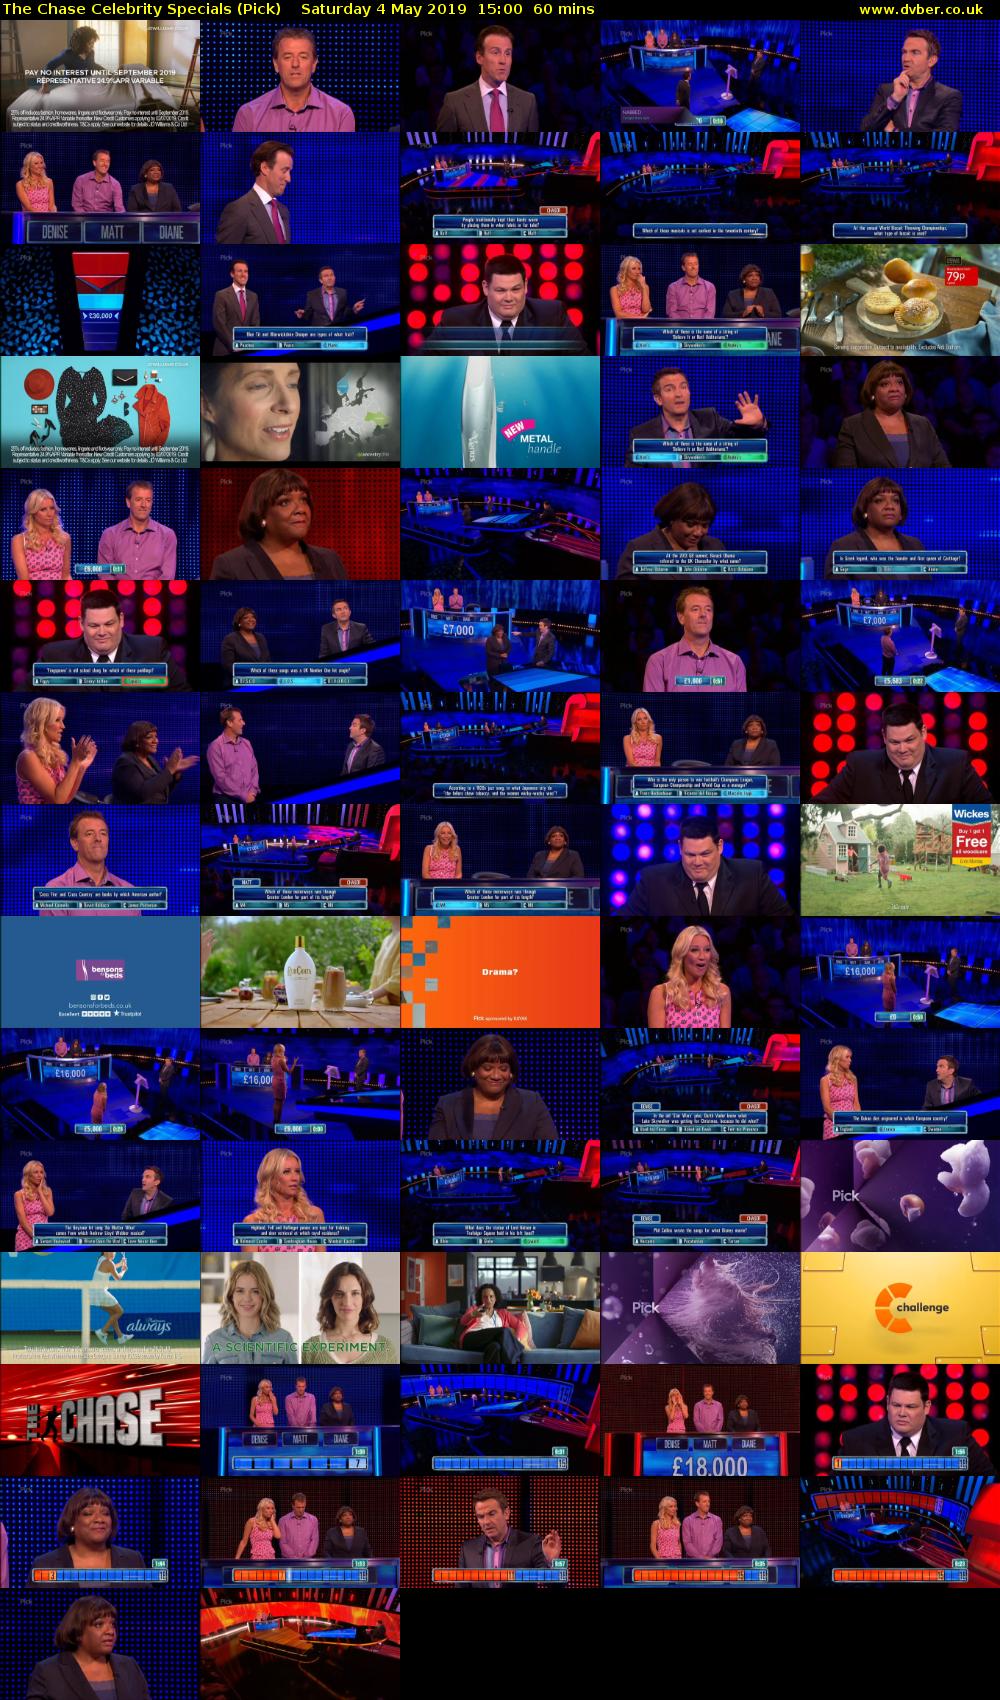 The Chase Celebrity Specials (Pick) Saturday 4 May 2019 15:00 - 16:00